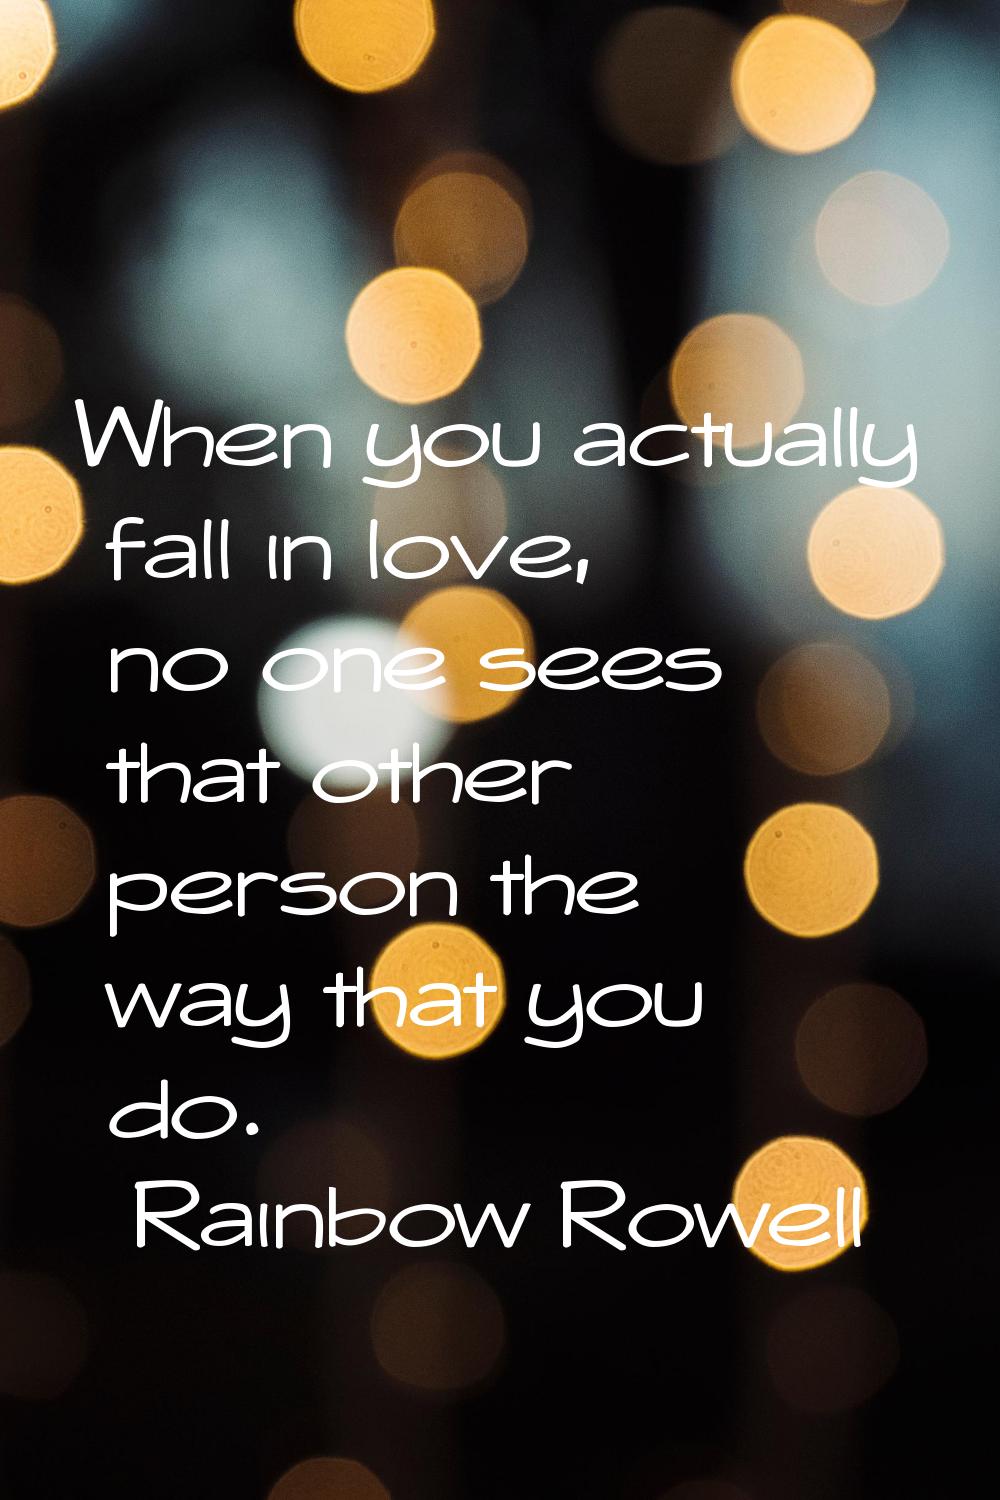 When you actually fall in love, no one sees that other person the way that you do.